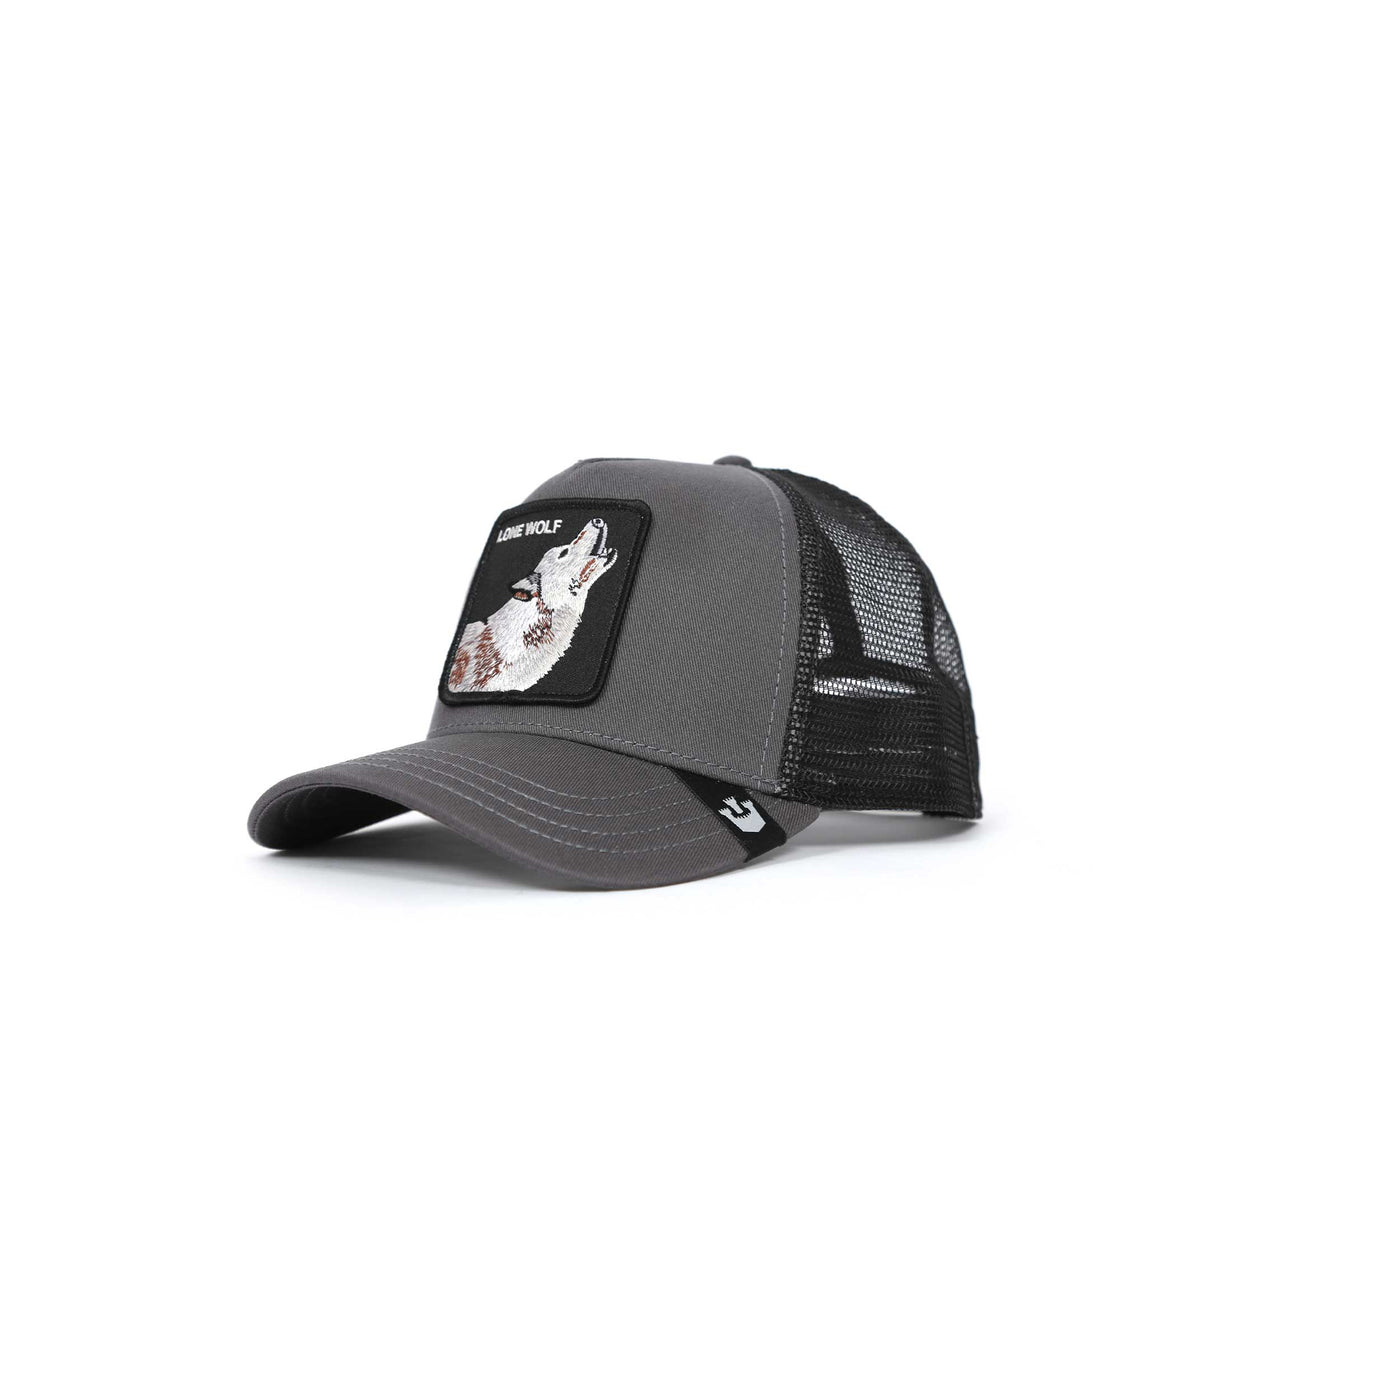 Goorin Bros The Lone Wolf Trucker Cap in Charcoal Angle